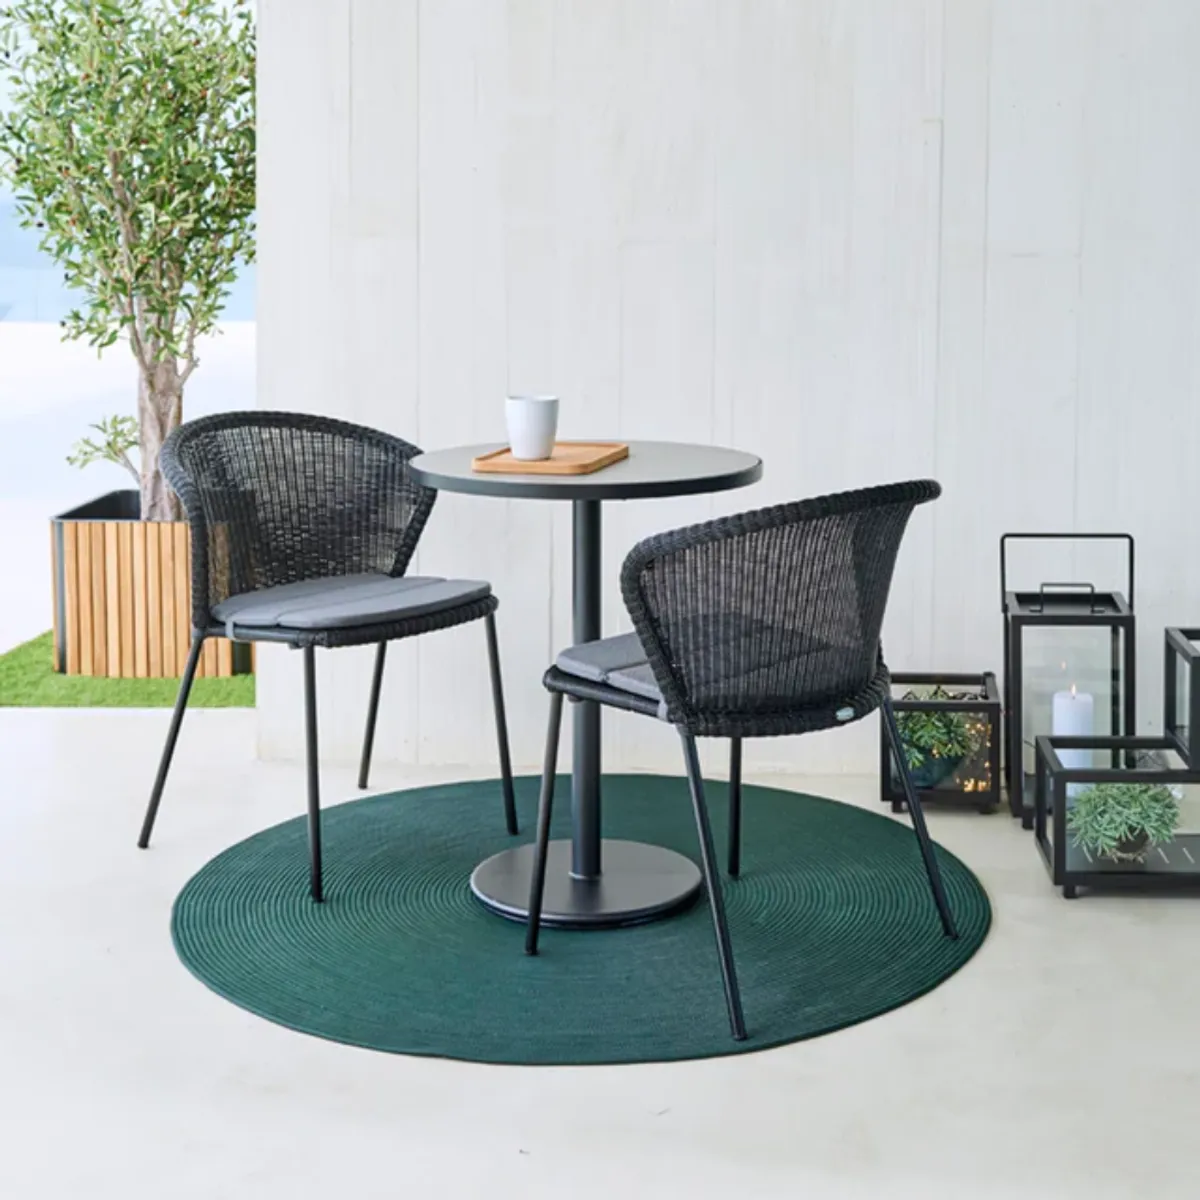 Tropez stacking chair 2